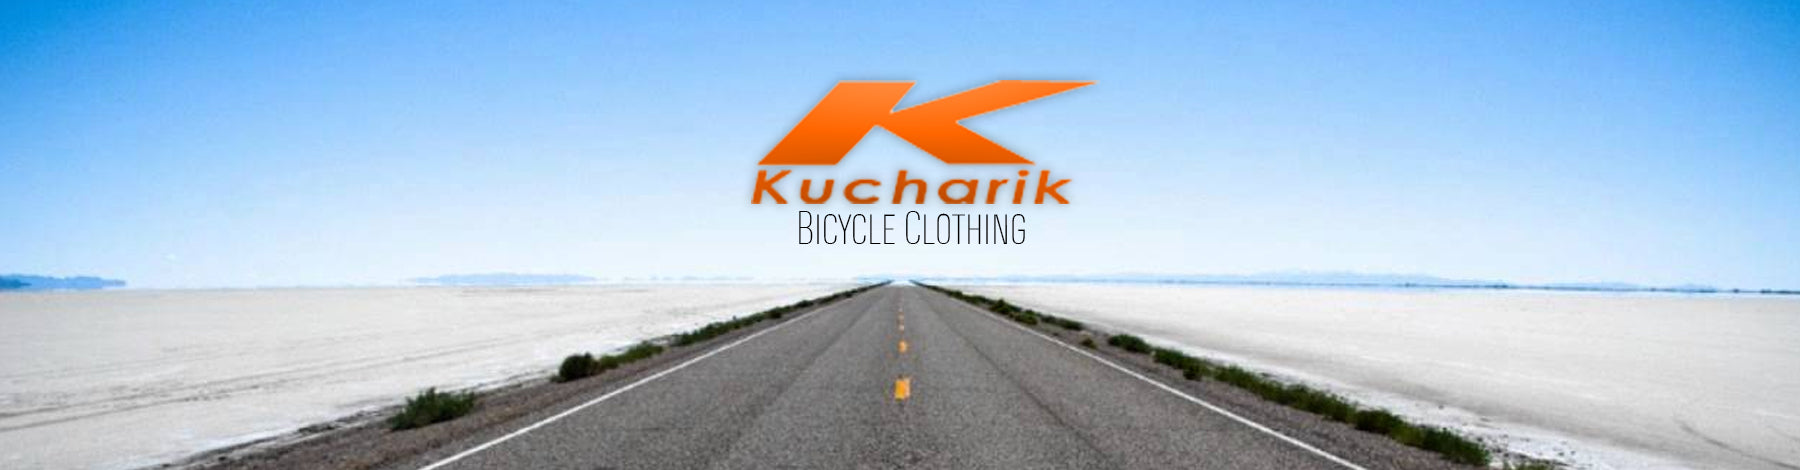 Top Selling Bicycle Jersey